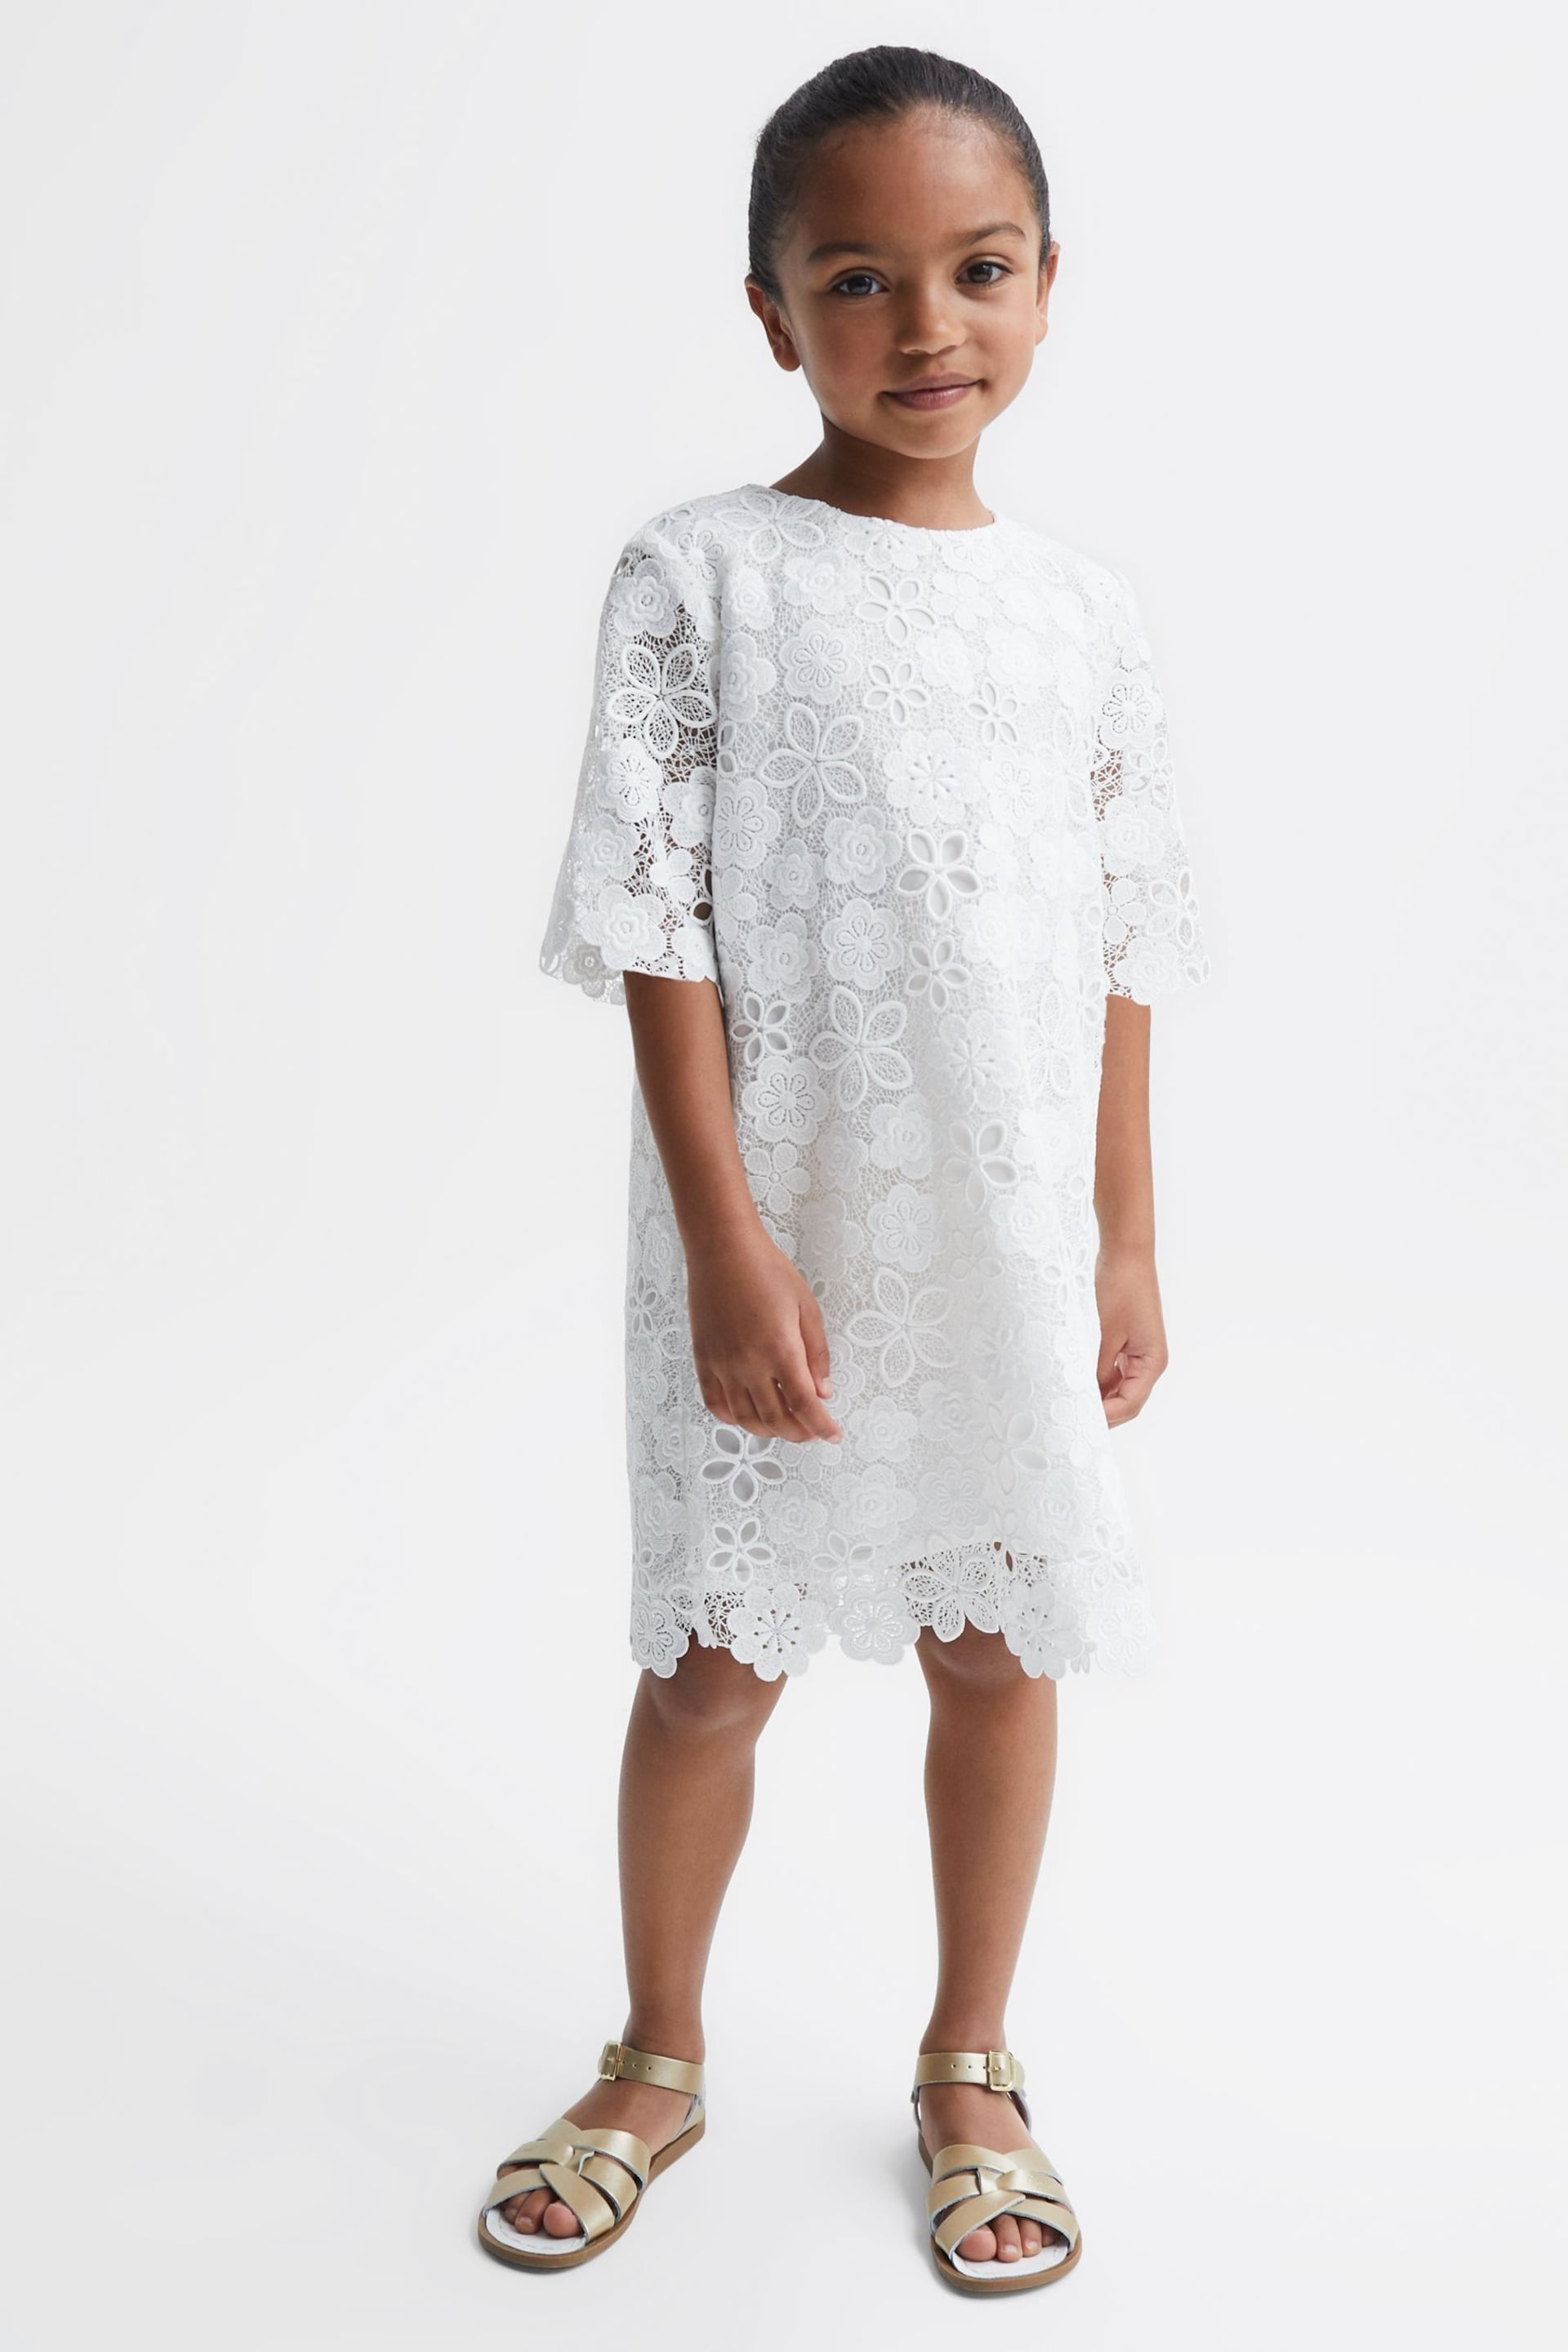 Reiss Ivory Susie Junior Lace T-Shirt Dress - Image 1 of 7